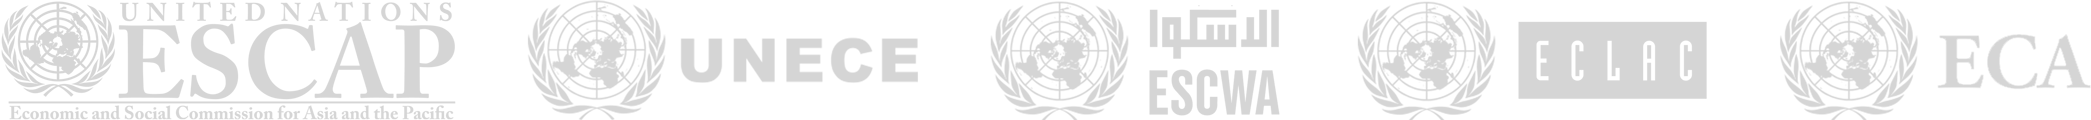 Regional Commissions of the United Nations